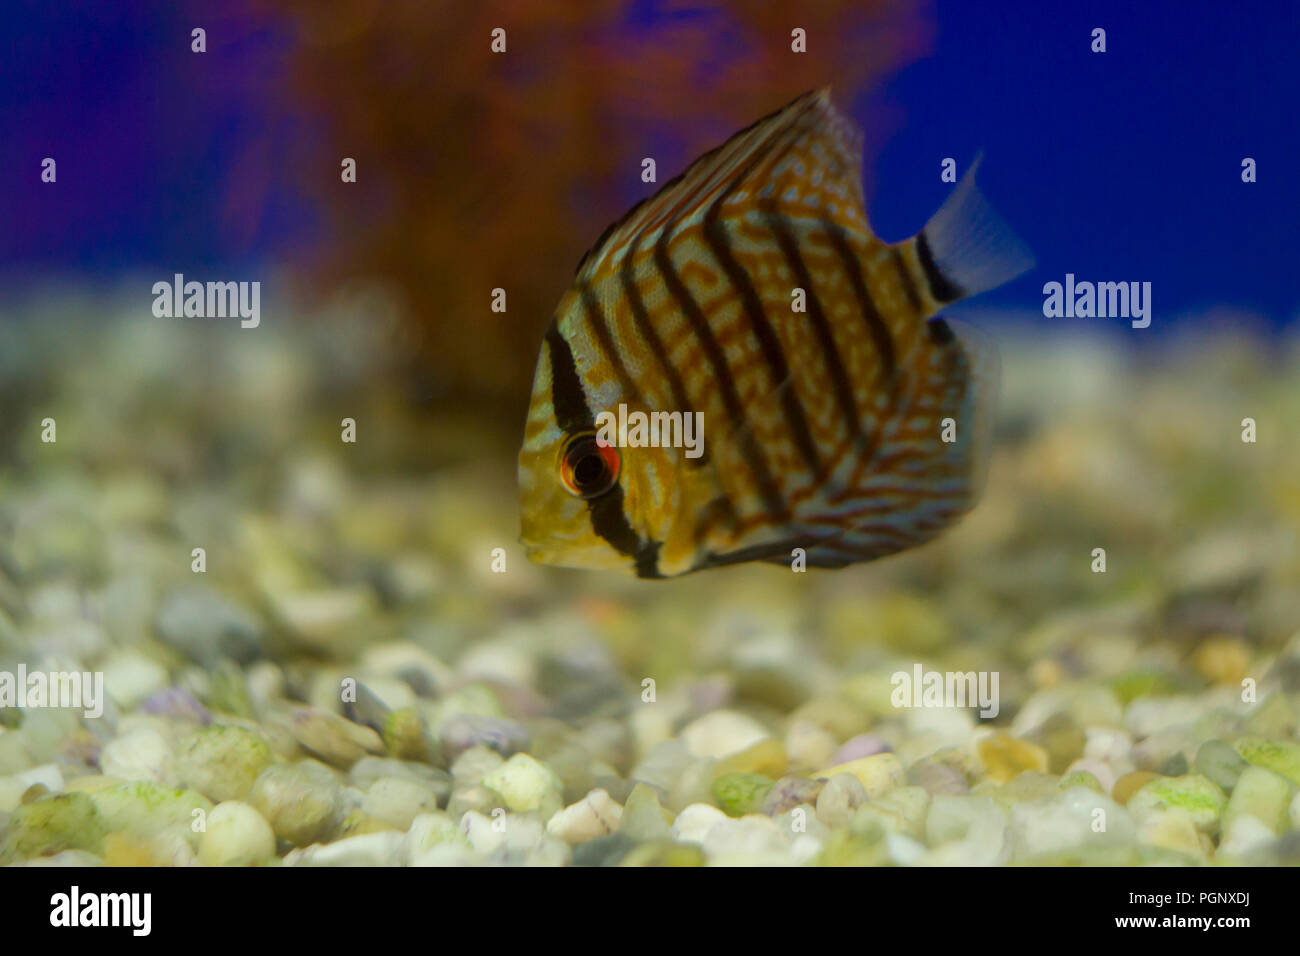 Discus fish in the aquarium. Discus are fish from the genus Symphysodon, which currently includes the species S. aequifasciatus, S. discus and S. tarz Stock Photo